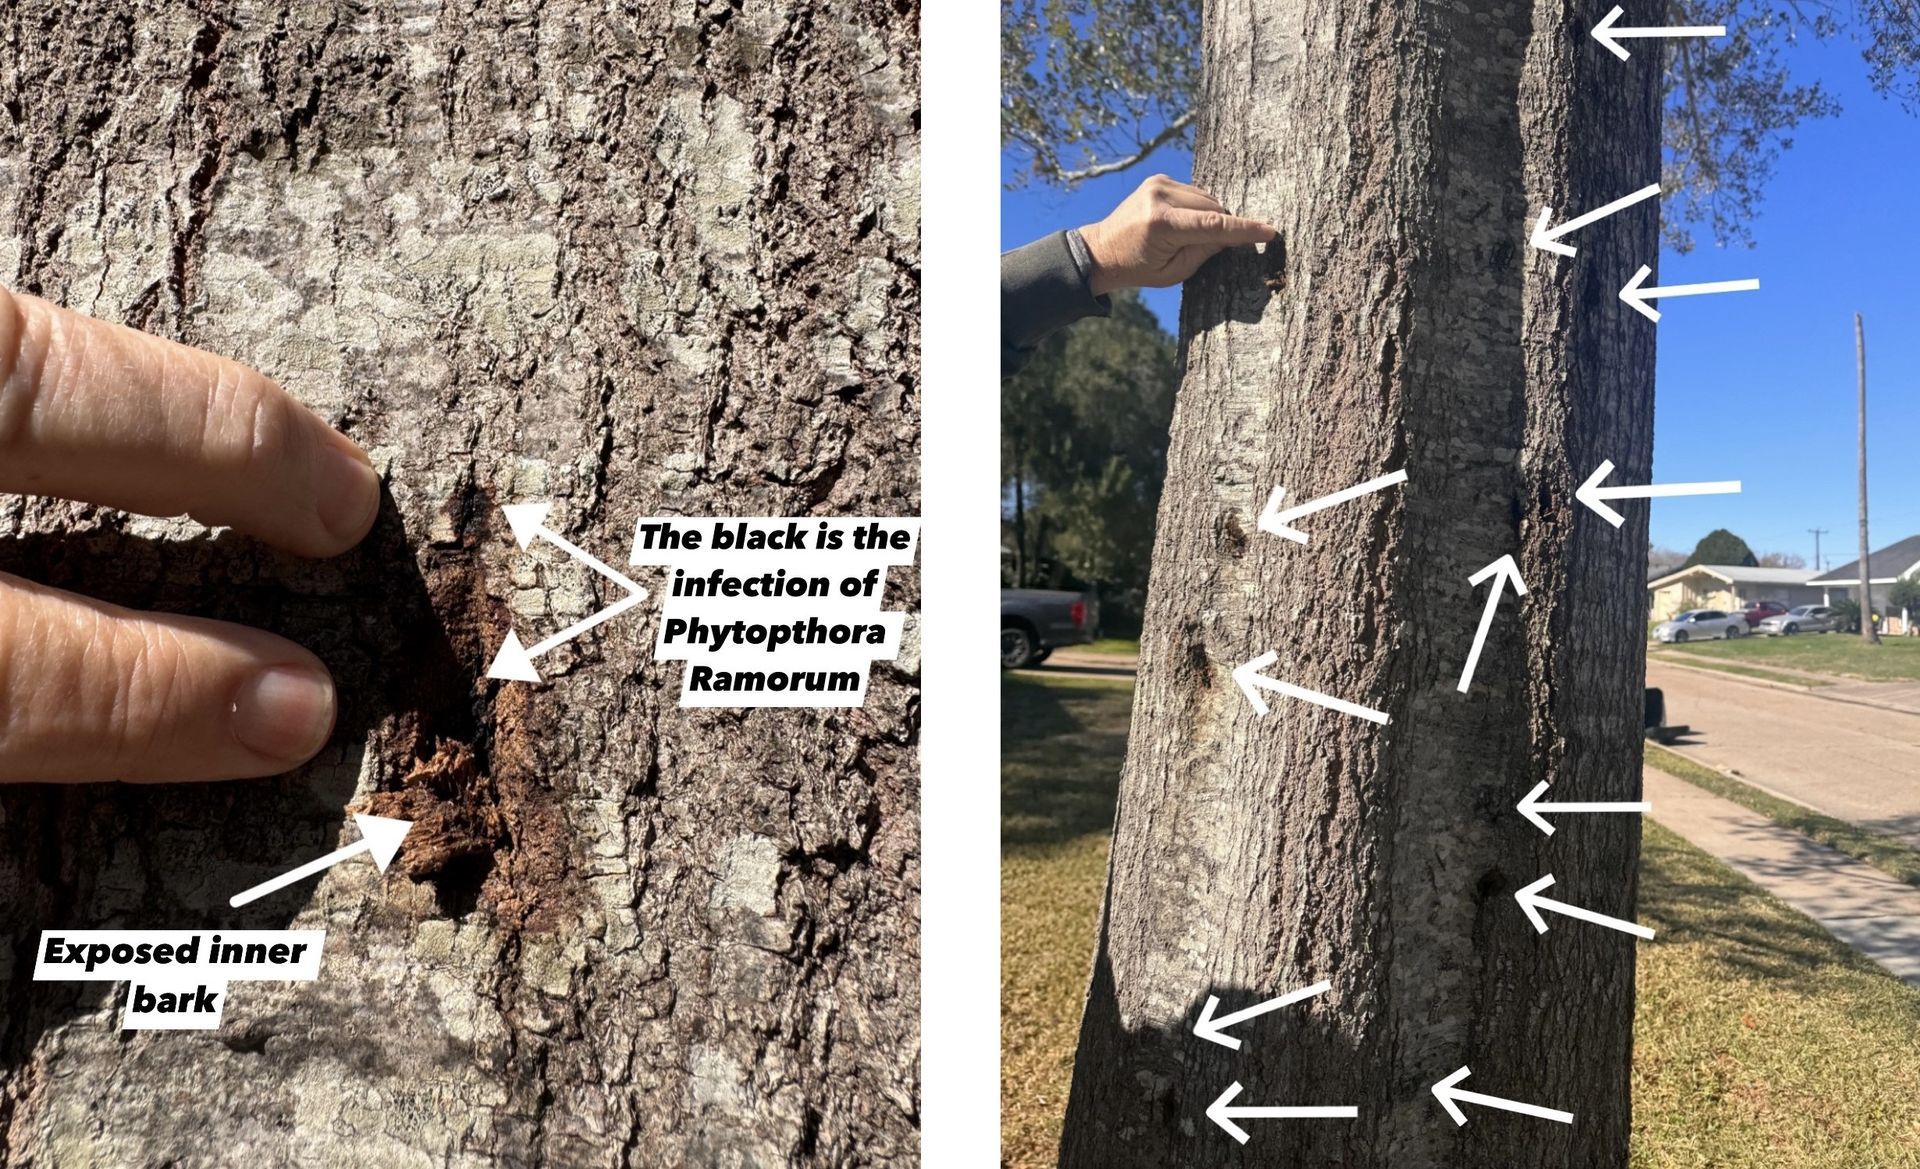 This image shows how an infection of Phytophthora has been directly transferred from tree climbing spurs